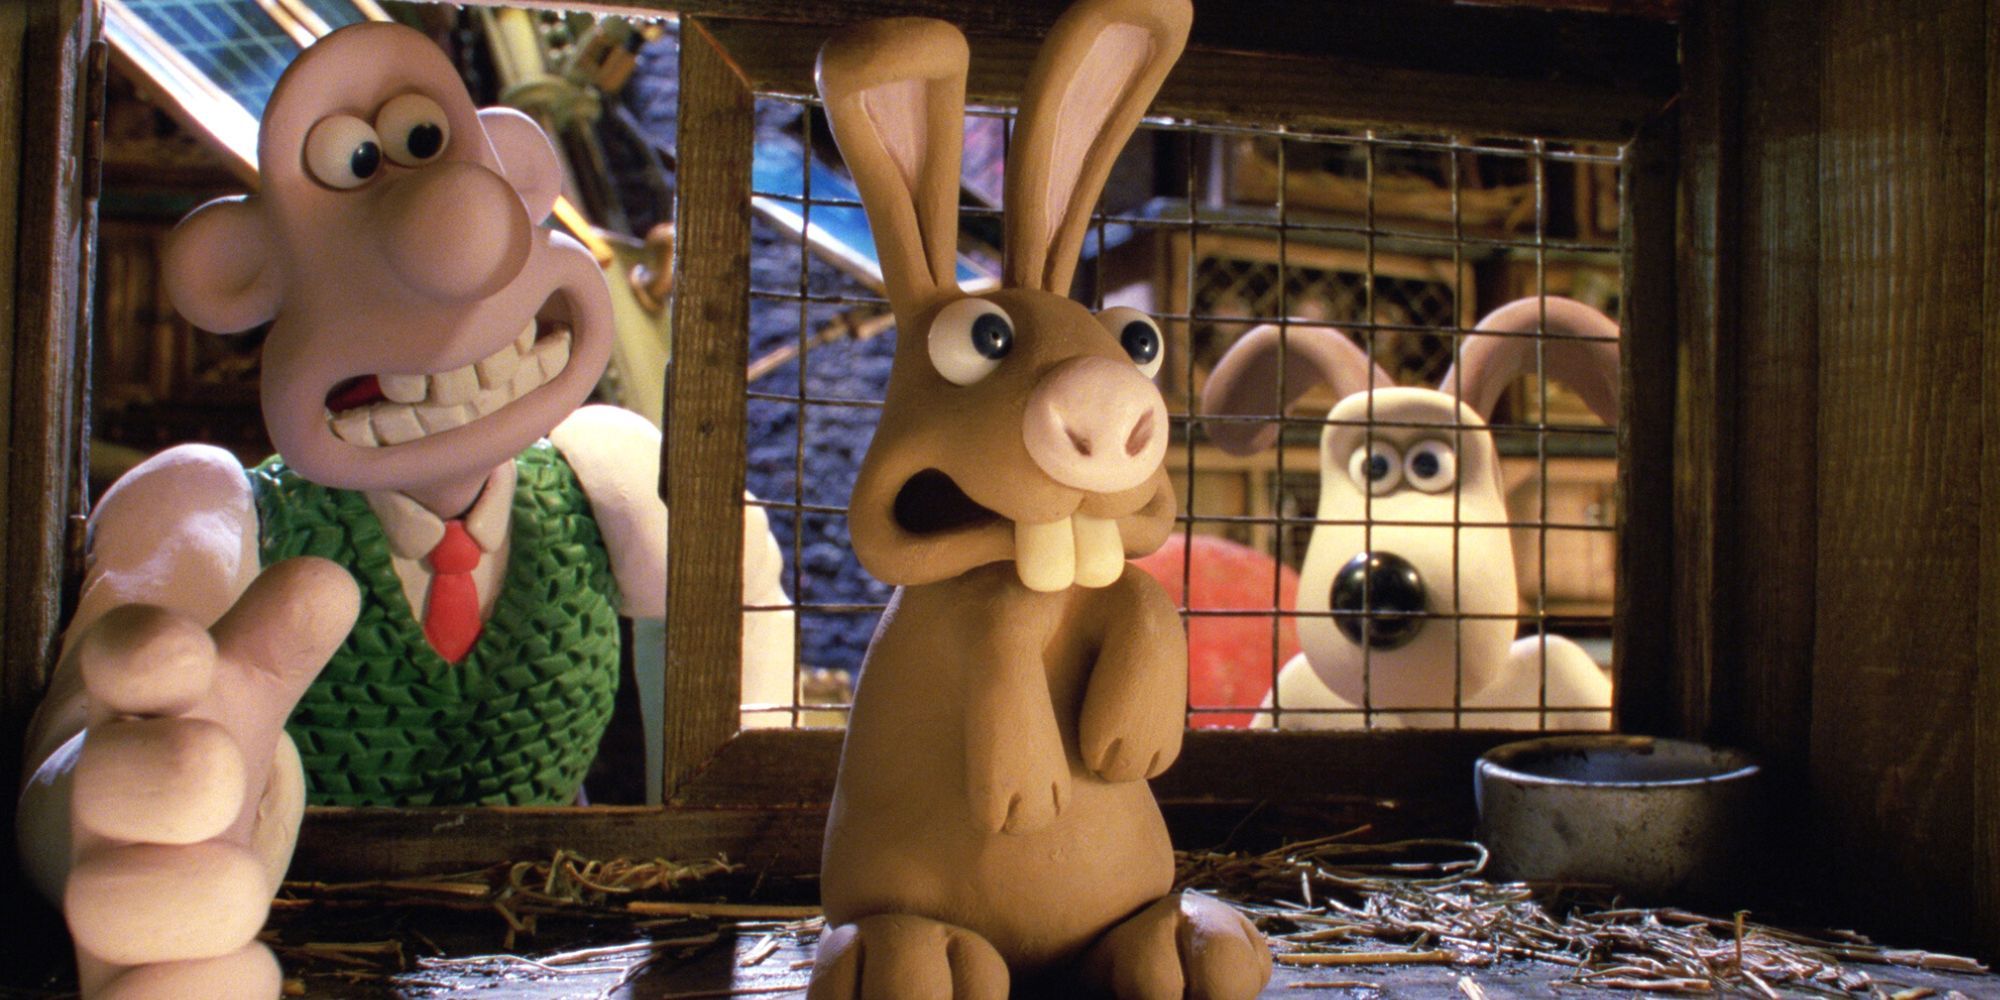 Wallace reaching into a cage to take out a rabbit while Gromit stands behind him in Wallace & Gromit: The Curse of the Were-Rabbit